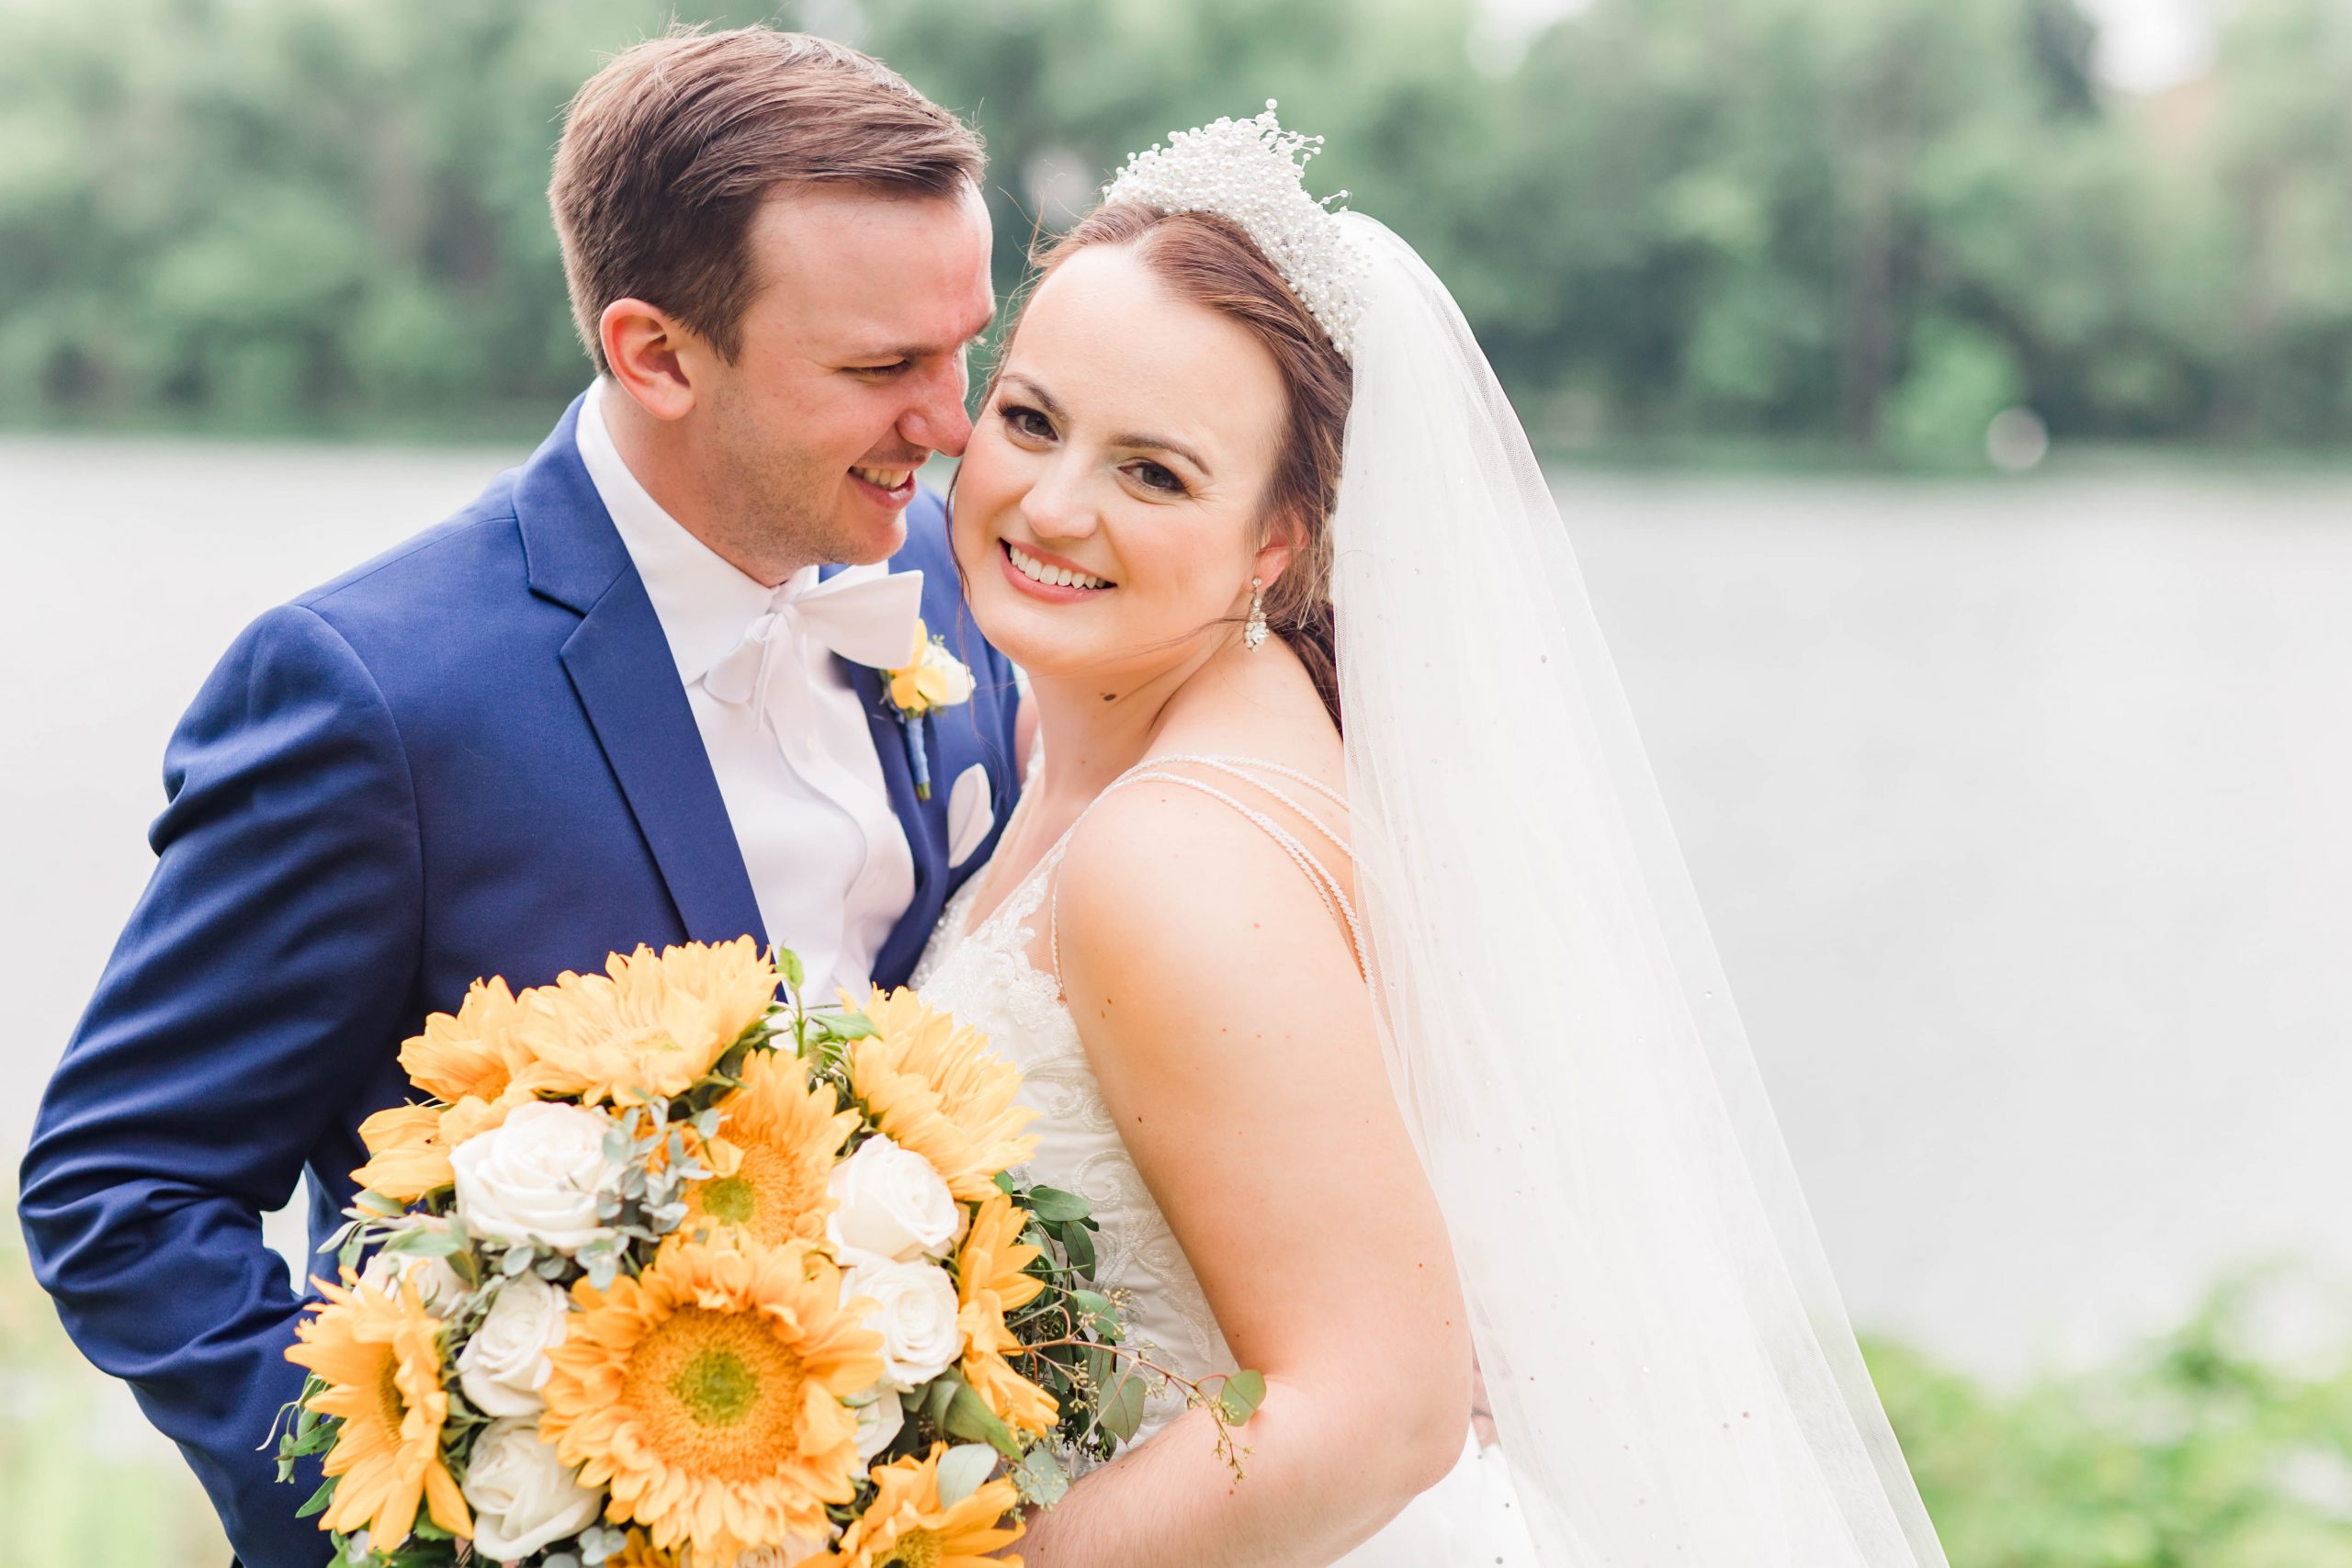 Bride and groom smiling at the camera with a sunflower bouquet.